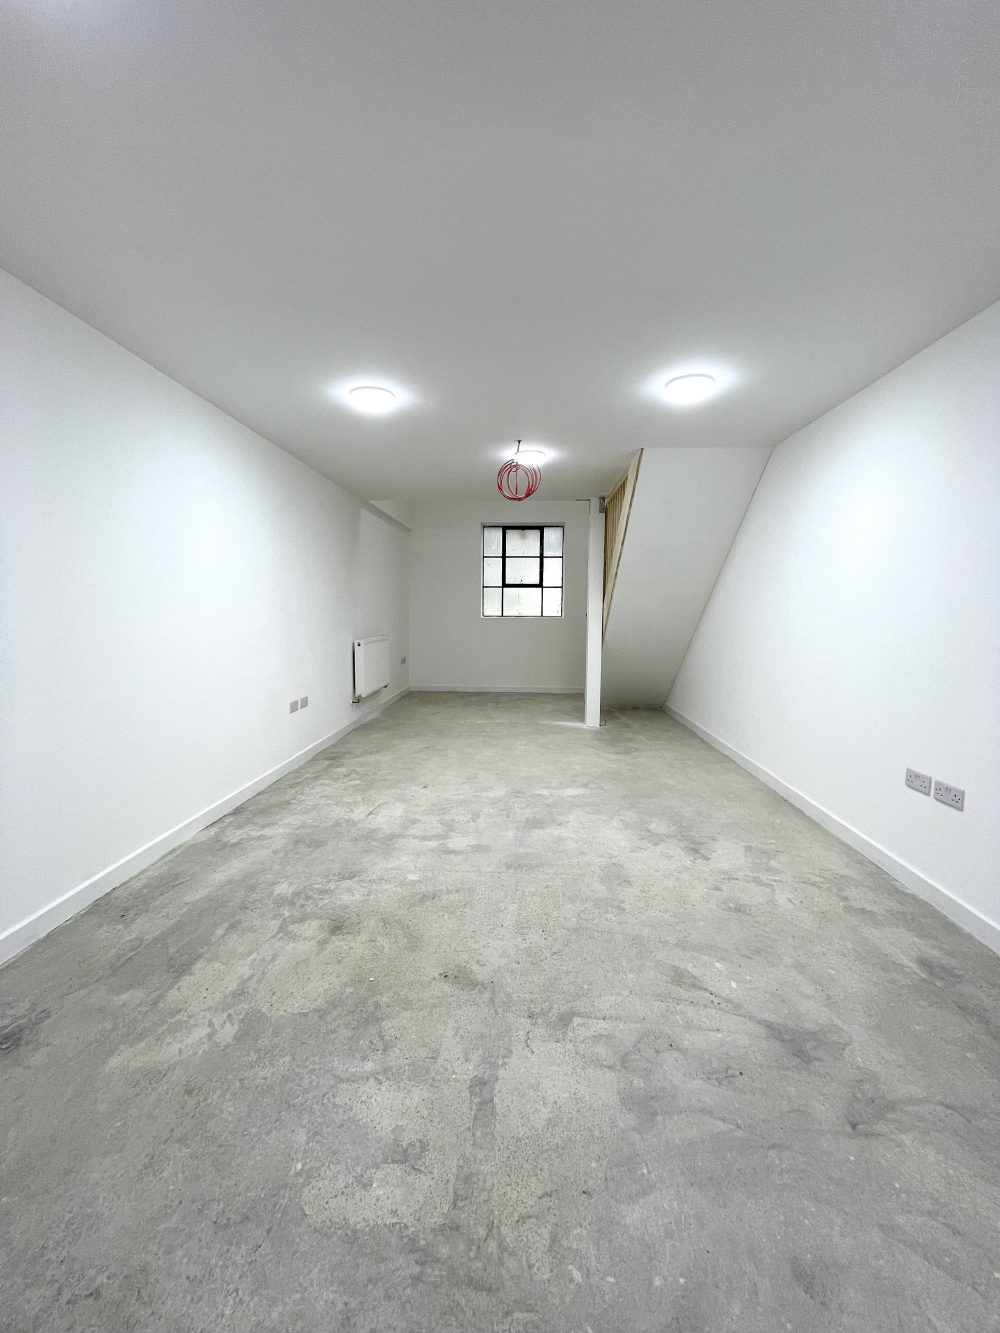 Creative live work style Studio flat Available to rent in EN3 Enfield Alxandra rd Pic5